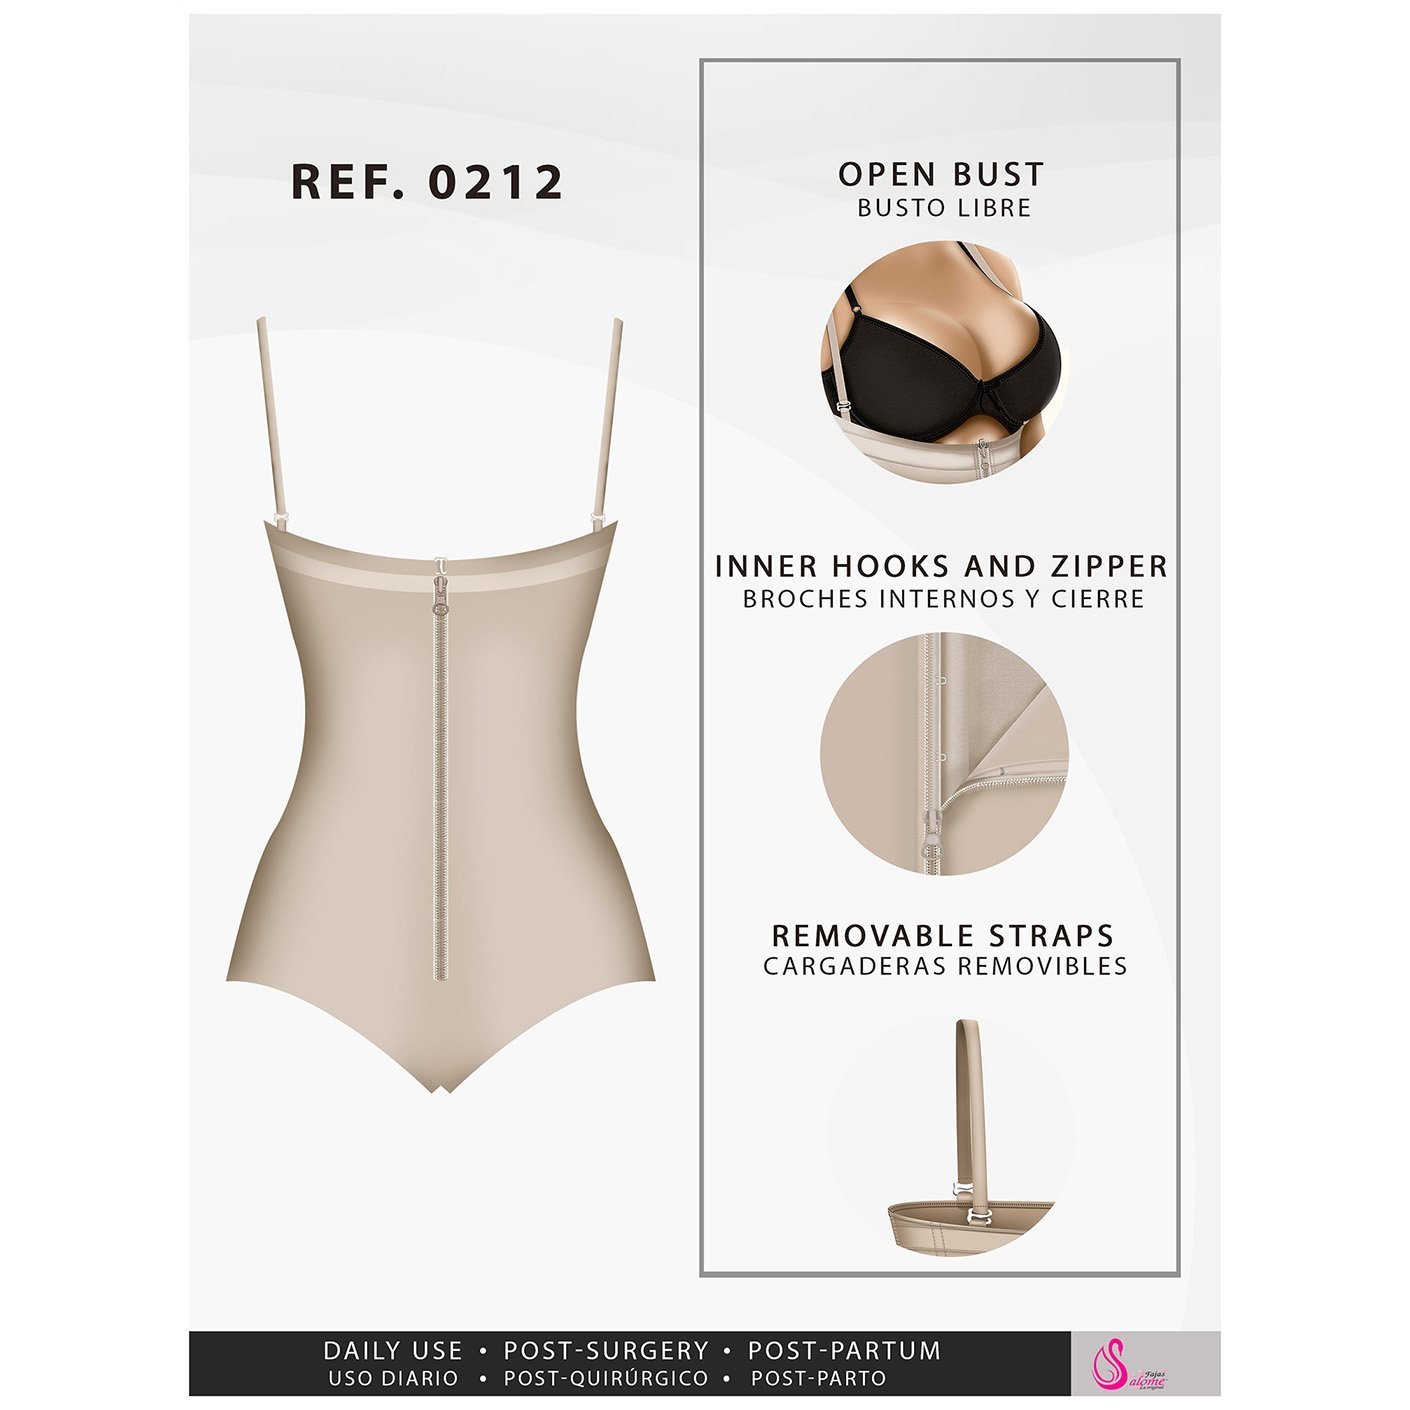 FAJAS SALOME 212 Strapless Thong Body Shaper - New England Supplier